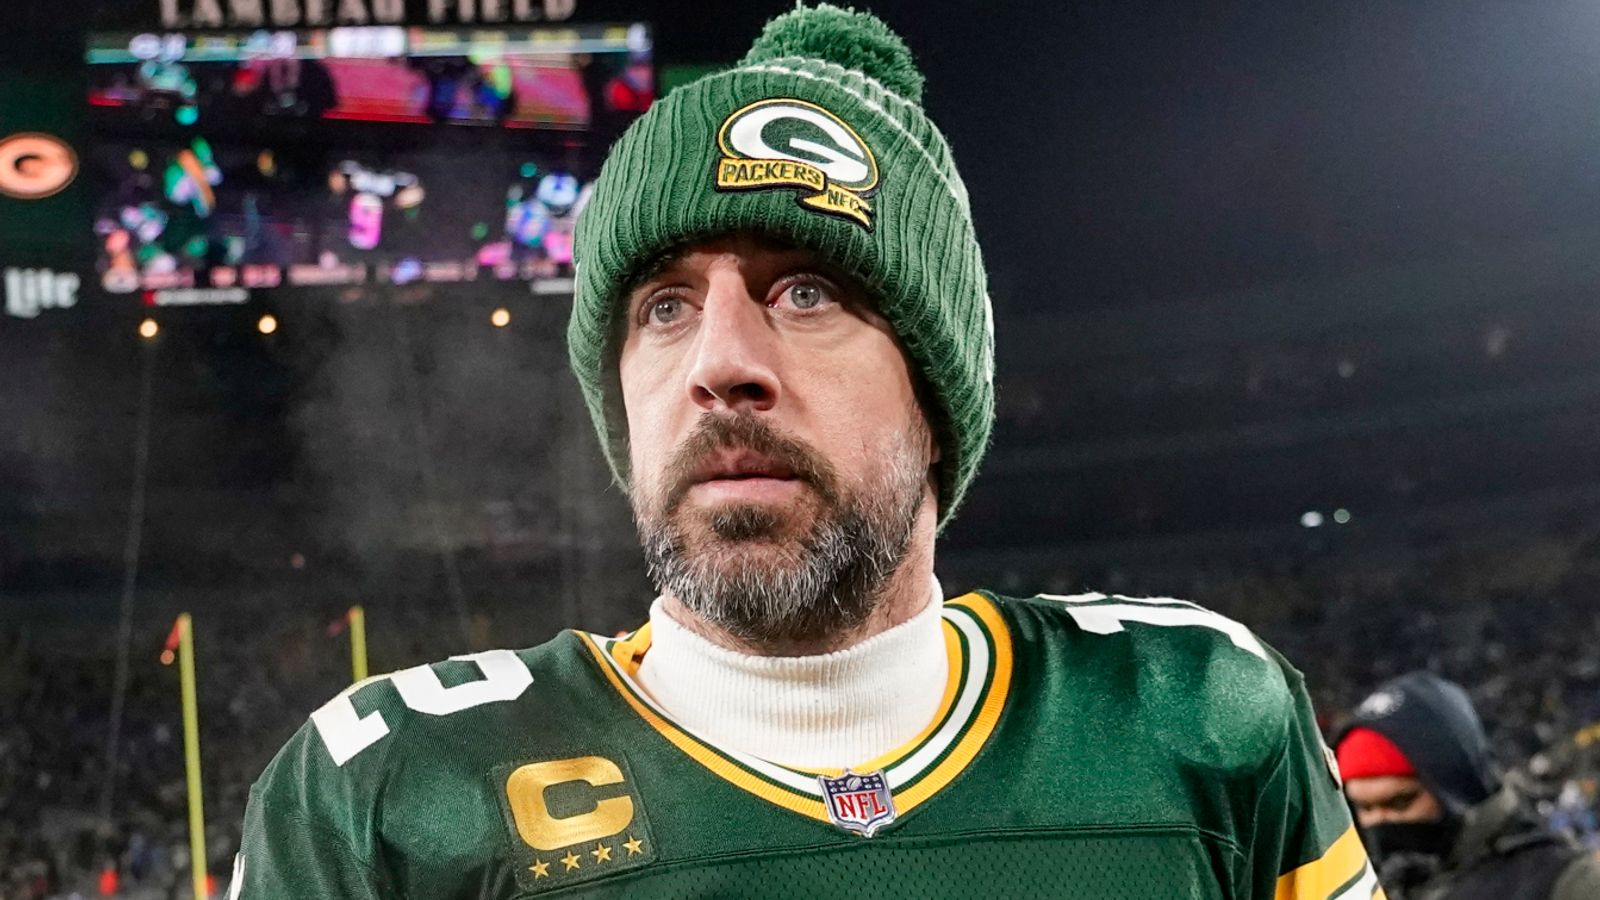 Packers agree to trade four-time MVP Aaron Rodgers to Jets